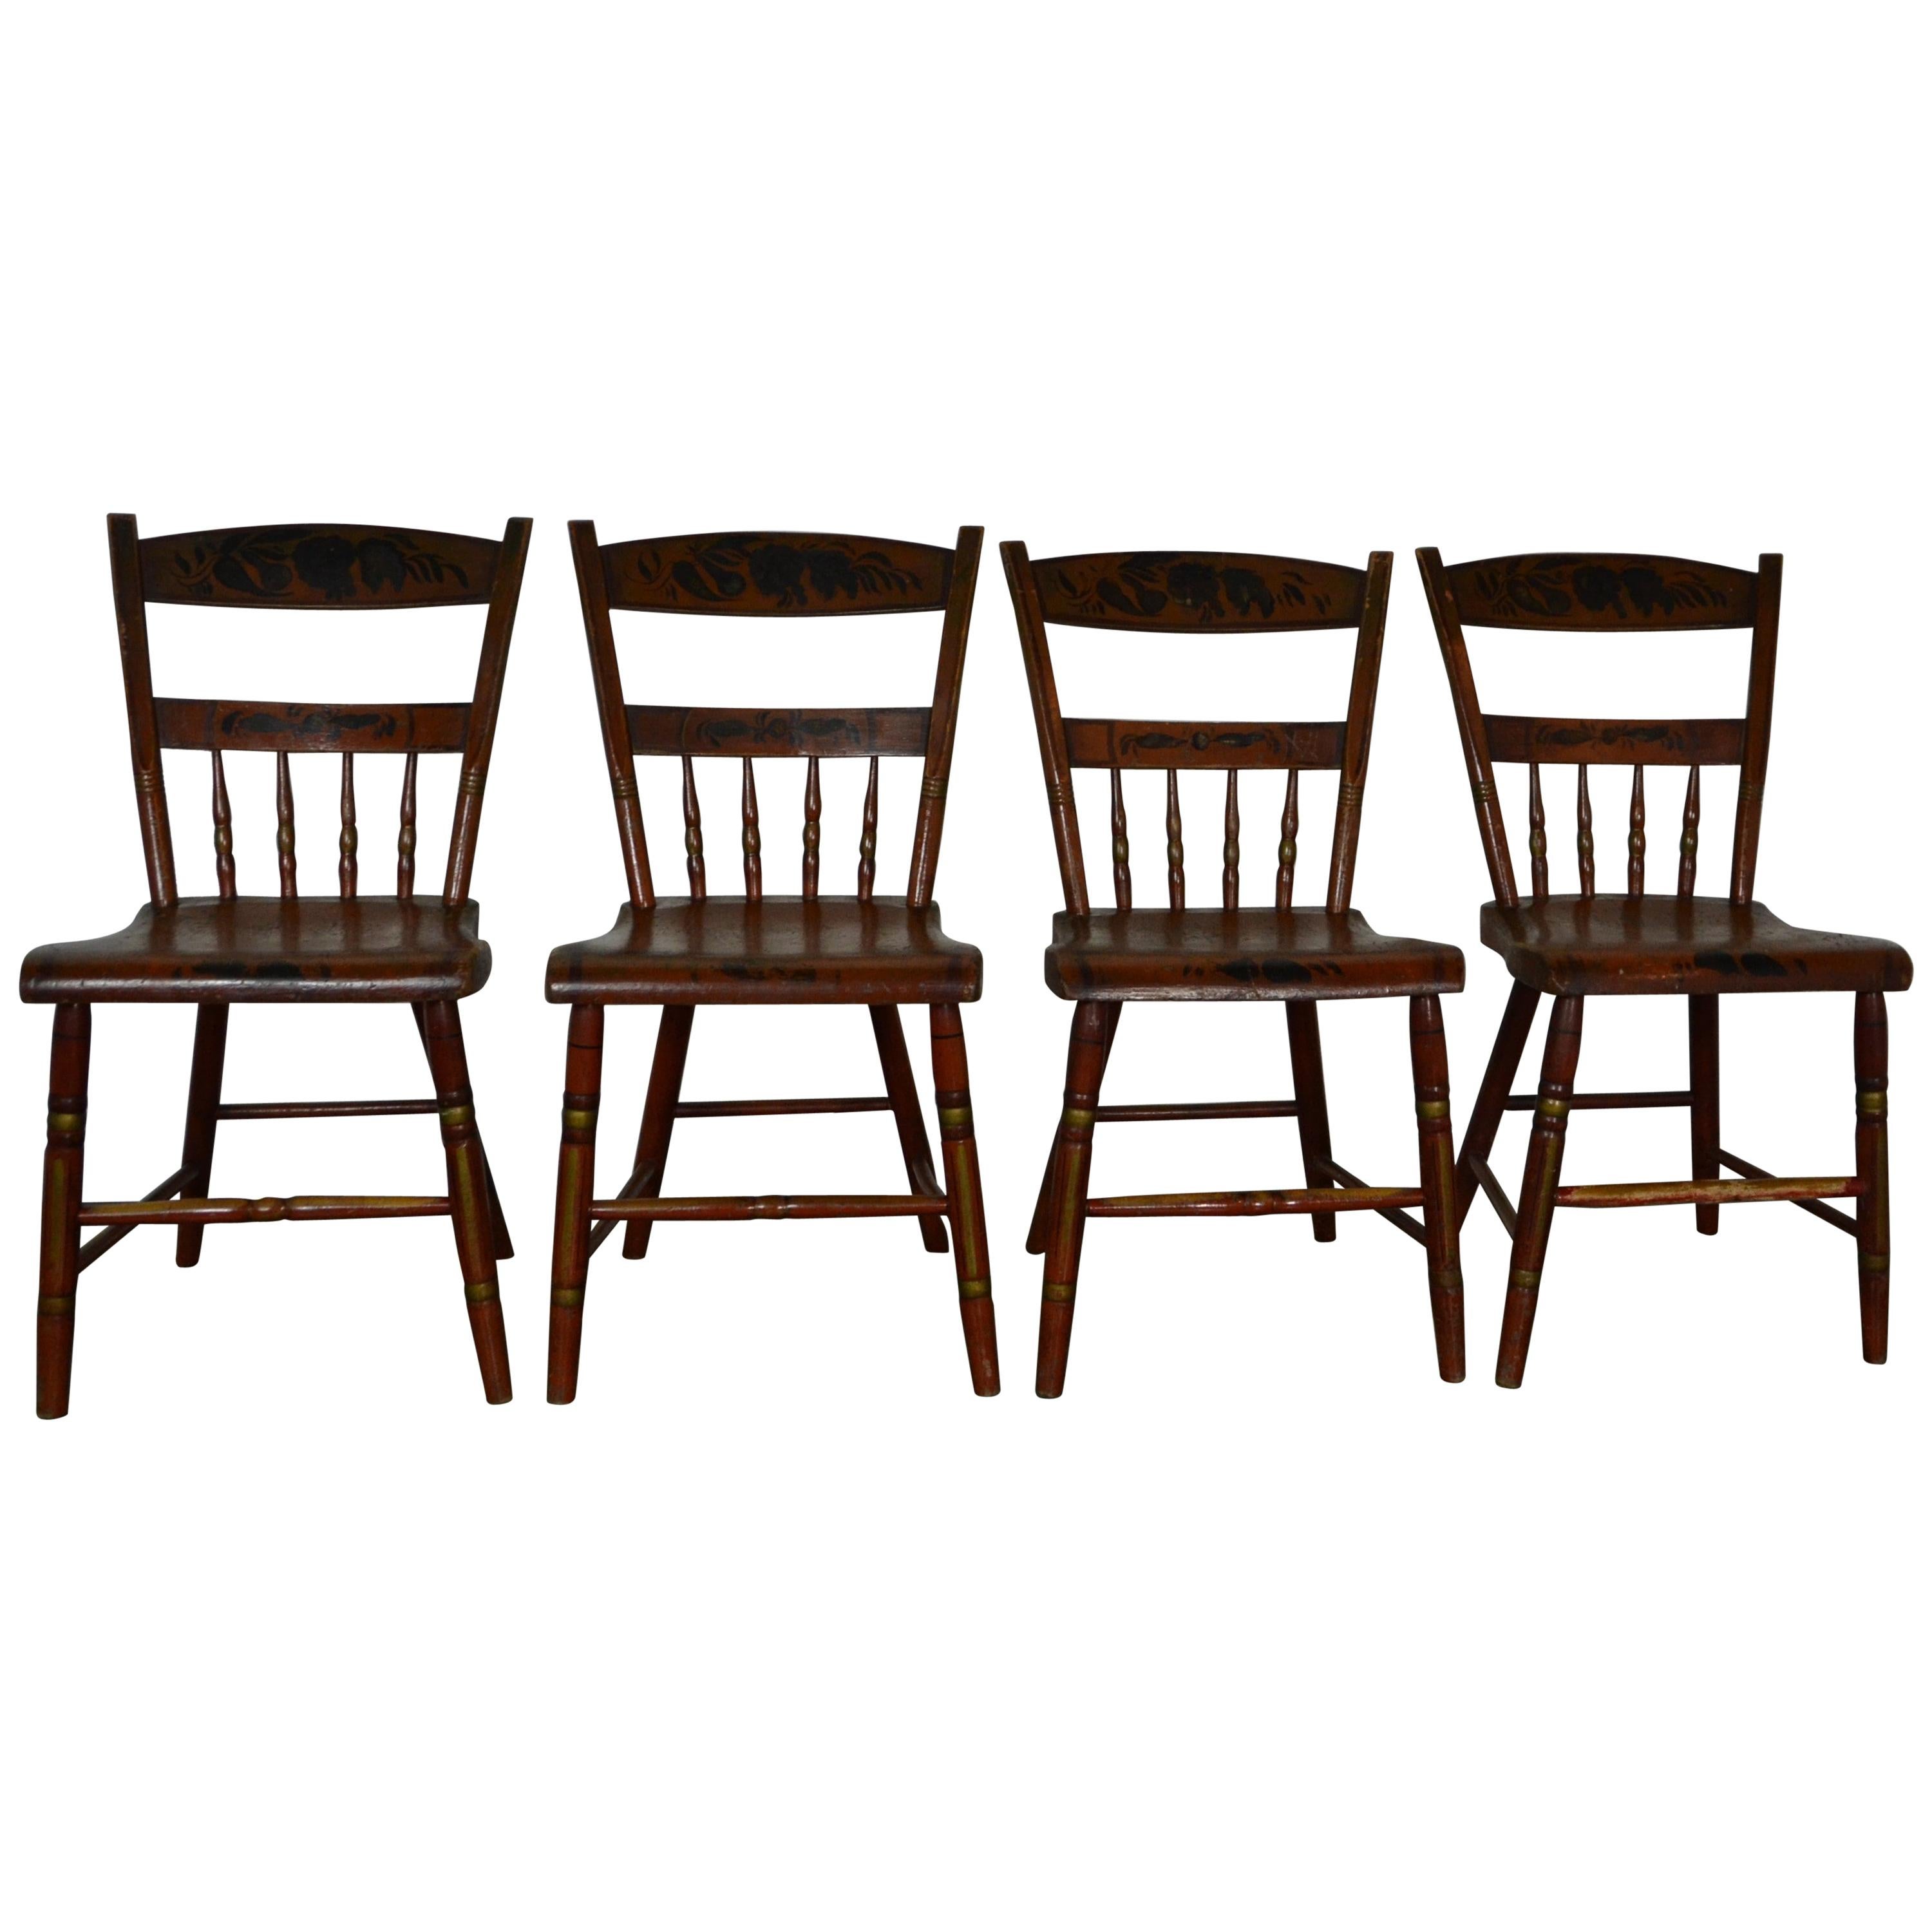 19th Century Hitchcock Chairs